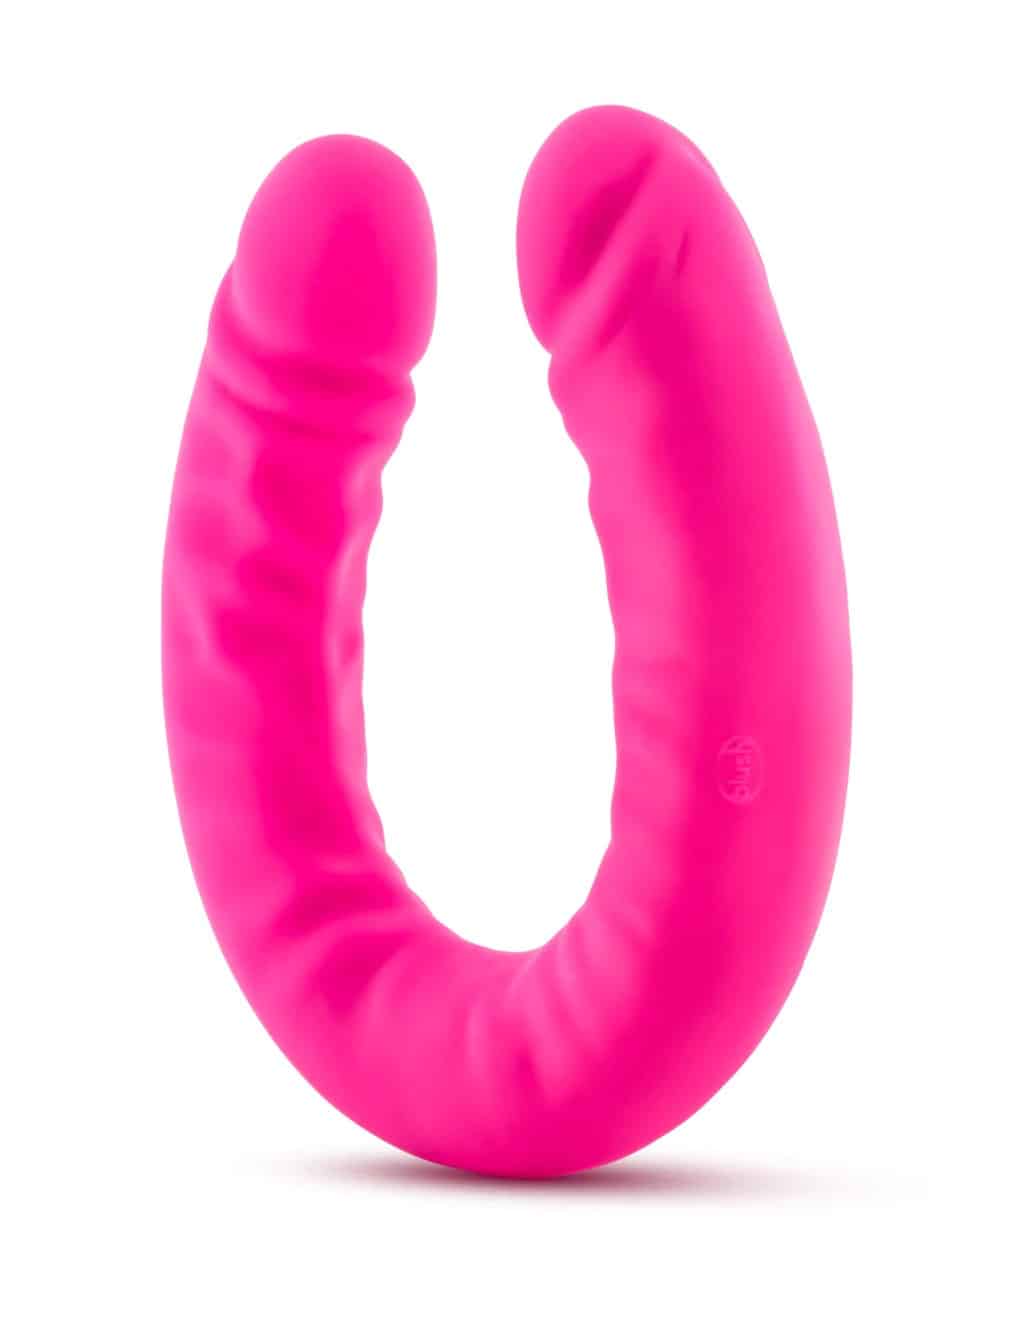 Ruse Double Ended Silicone Dildo. Slide 2